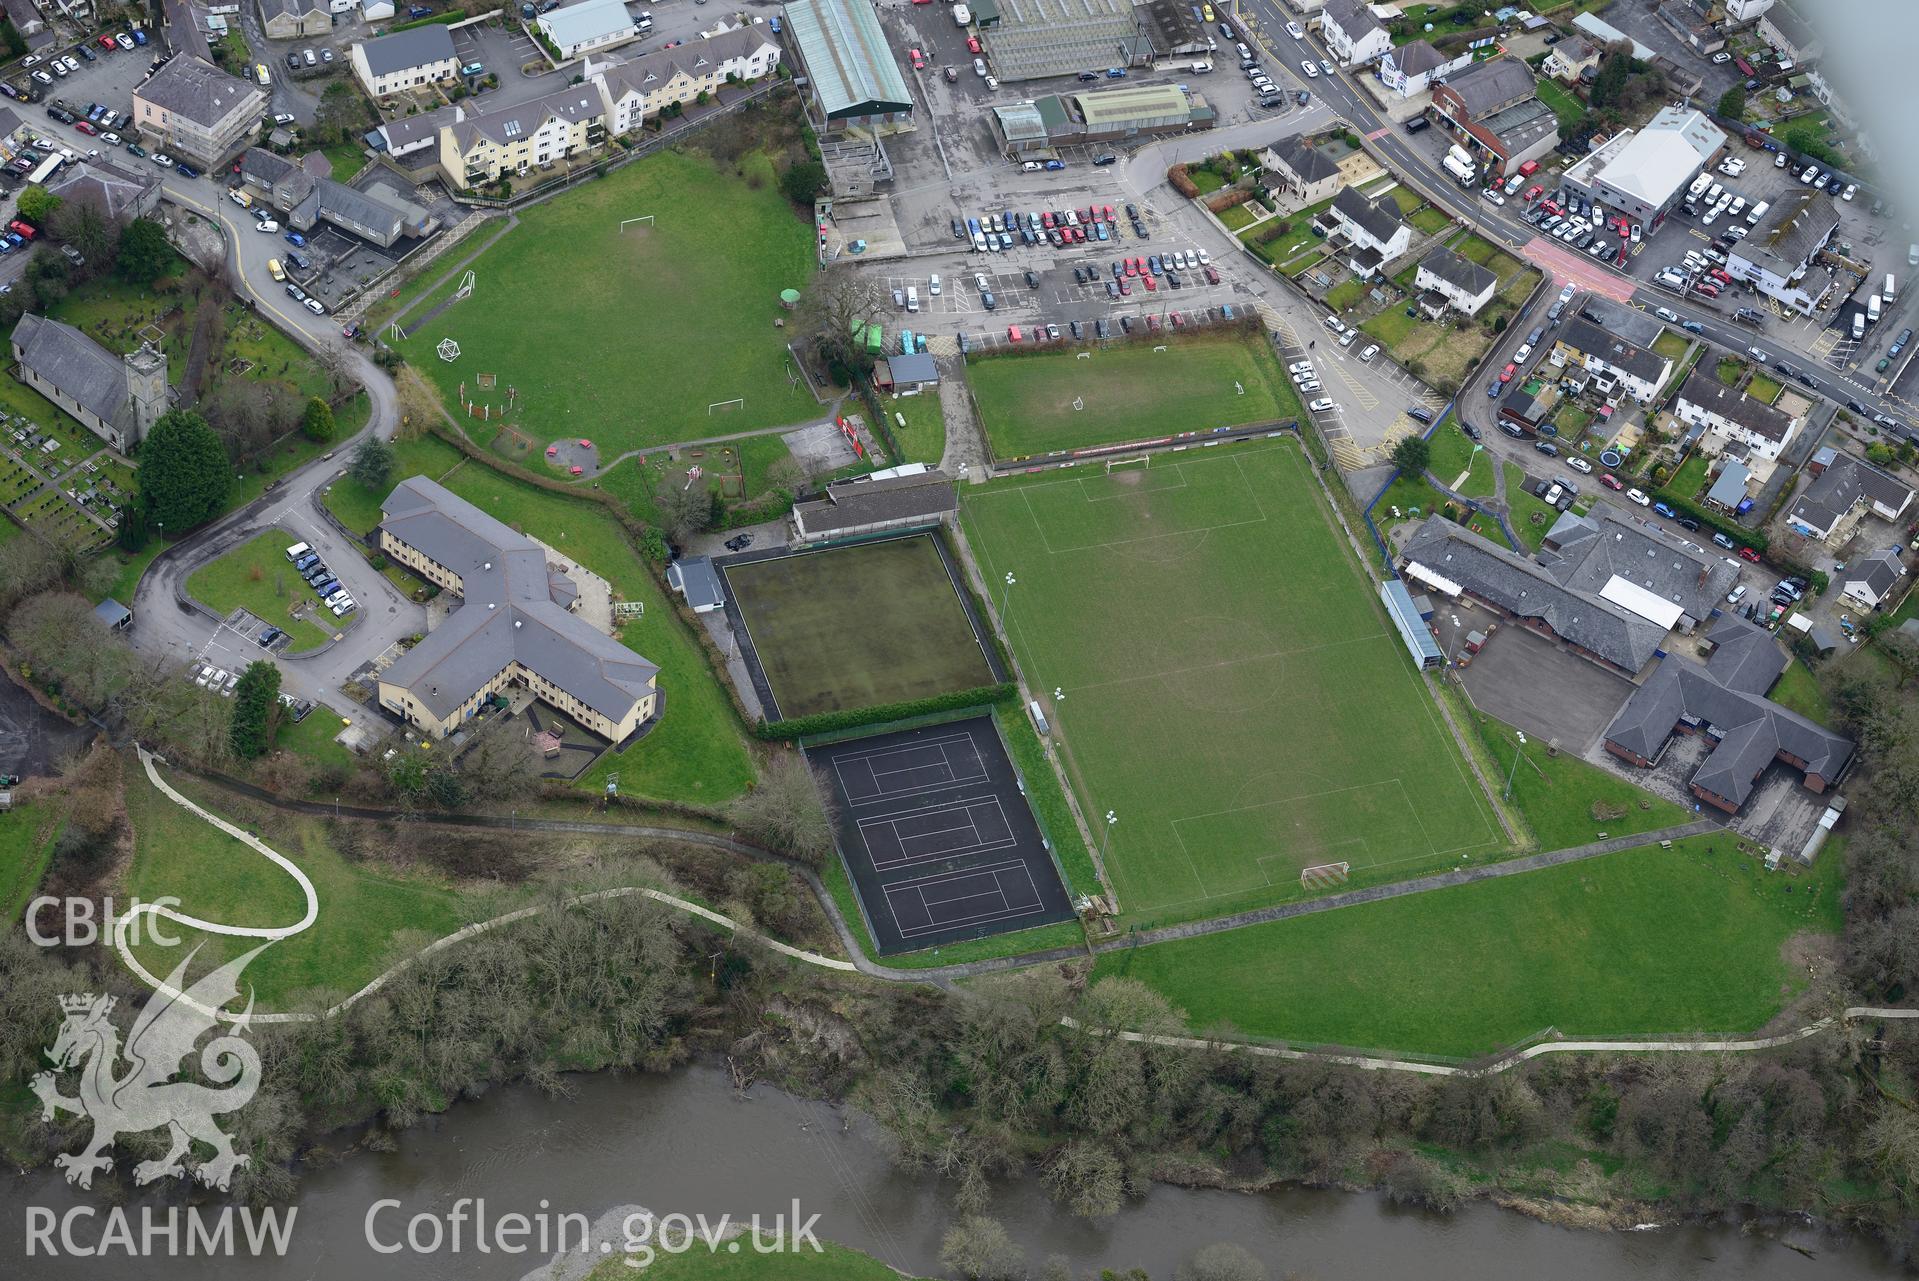 Ysgol y Ddwylan primary school and Maes Llywelyn assisted living residence, Newcastle Emlyn. Oblique aerial photograph taken during the Royal Commission's programme of archaeological aerial reconnaissance by Toby Driver on 13th March 2015.